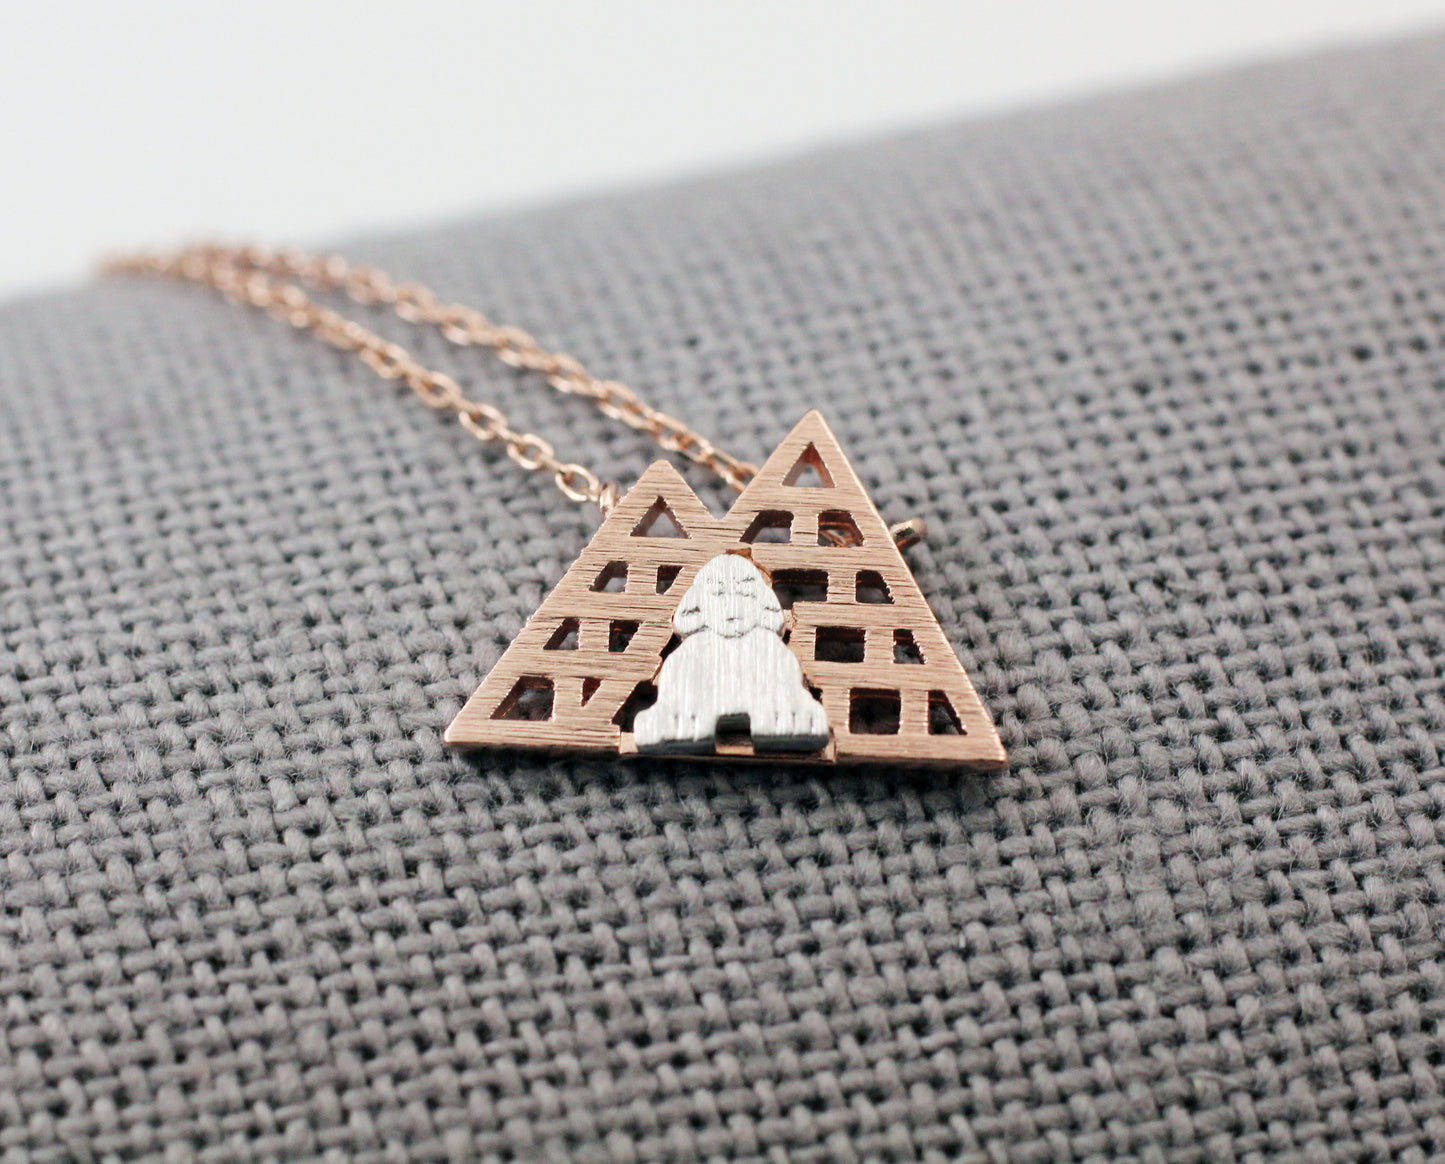 Egyptian pyramids and Sphinx Necklace, Ancient Egyptian pyramids necklace